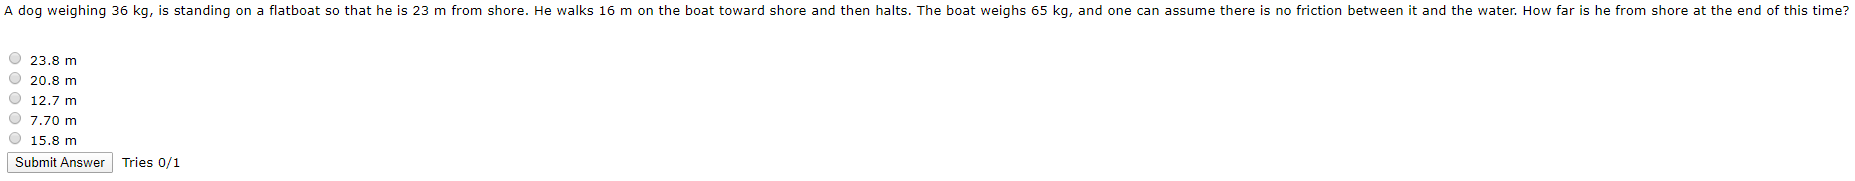 A dog weighing 36 kg, is standing on a flatboat so that he is 23 m from shore. He walks 16 m on the boat toward shore and then halts. The boat weighs 65 kg, and one can assume there is no friction between it and the water. How far is he from shore at the end of this time?
